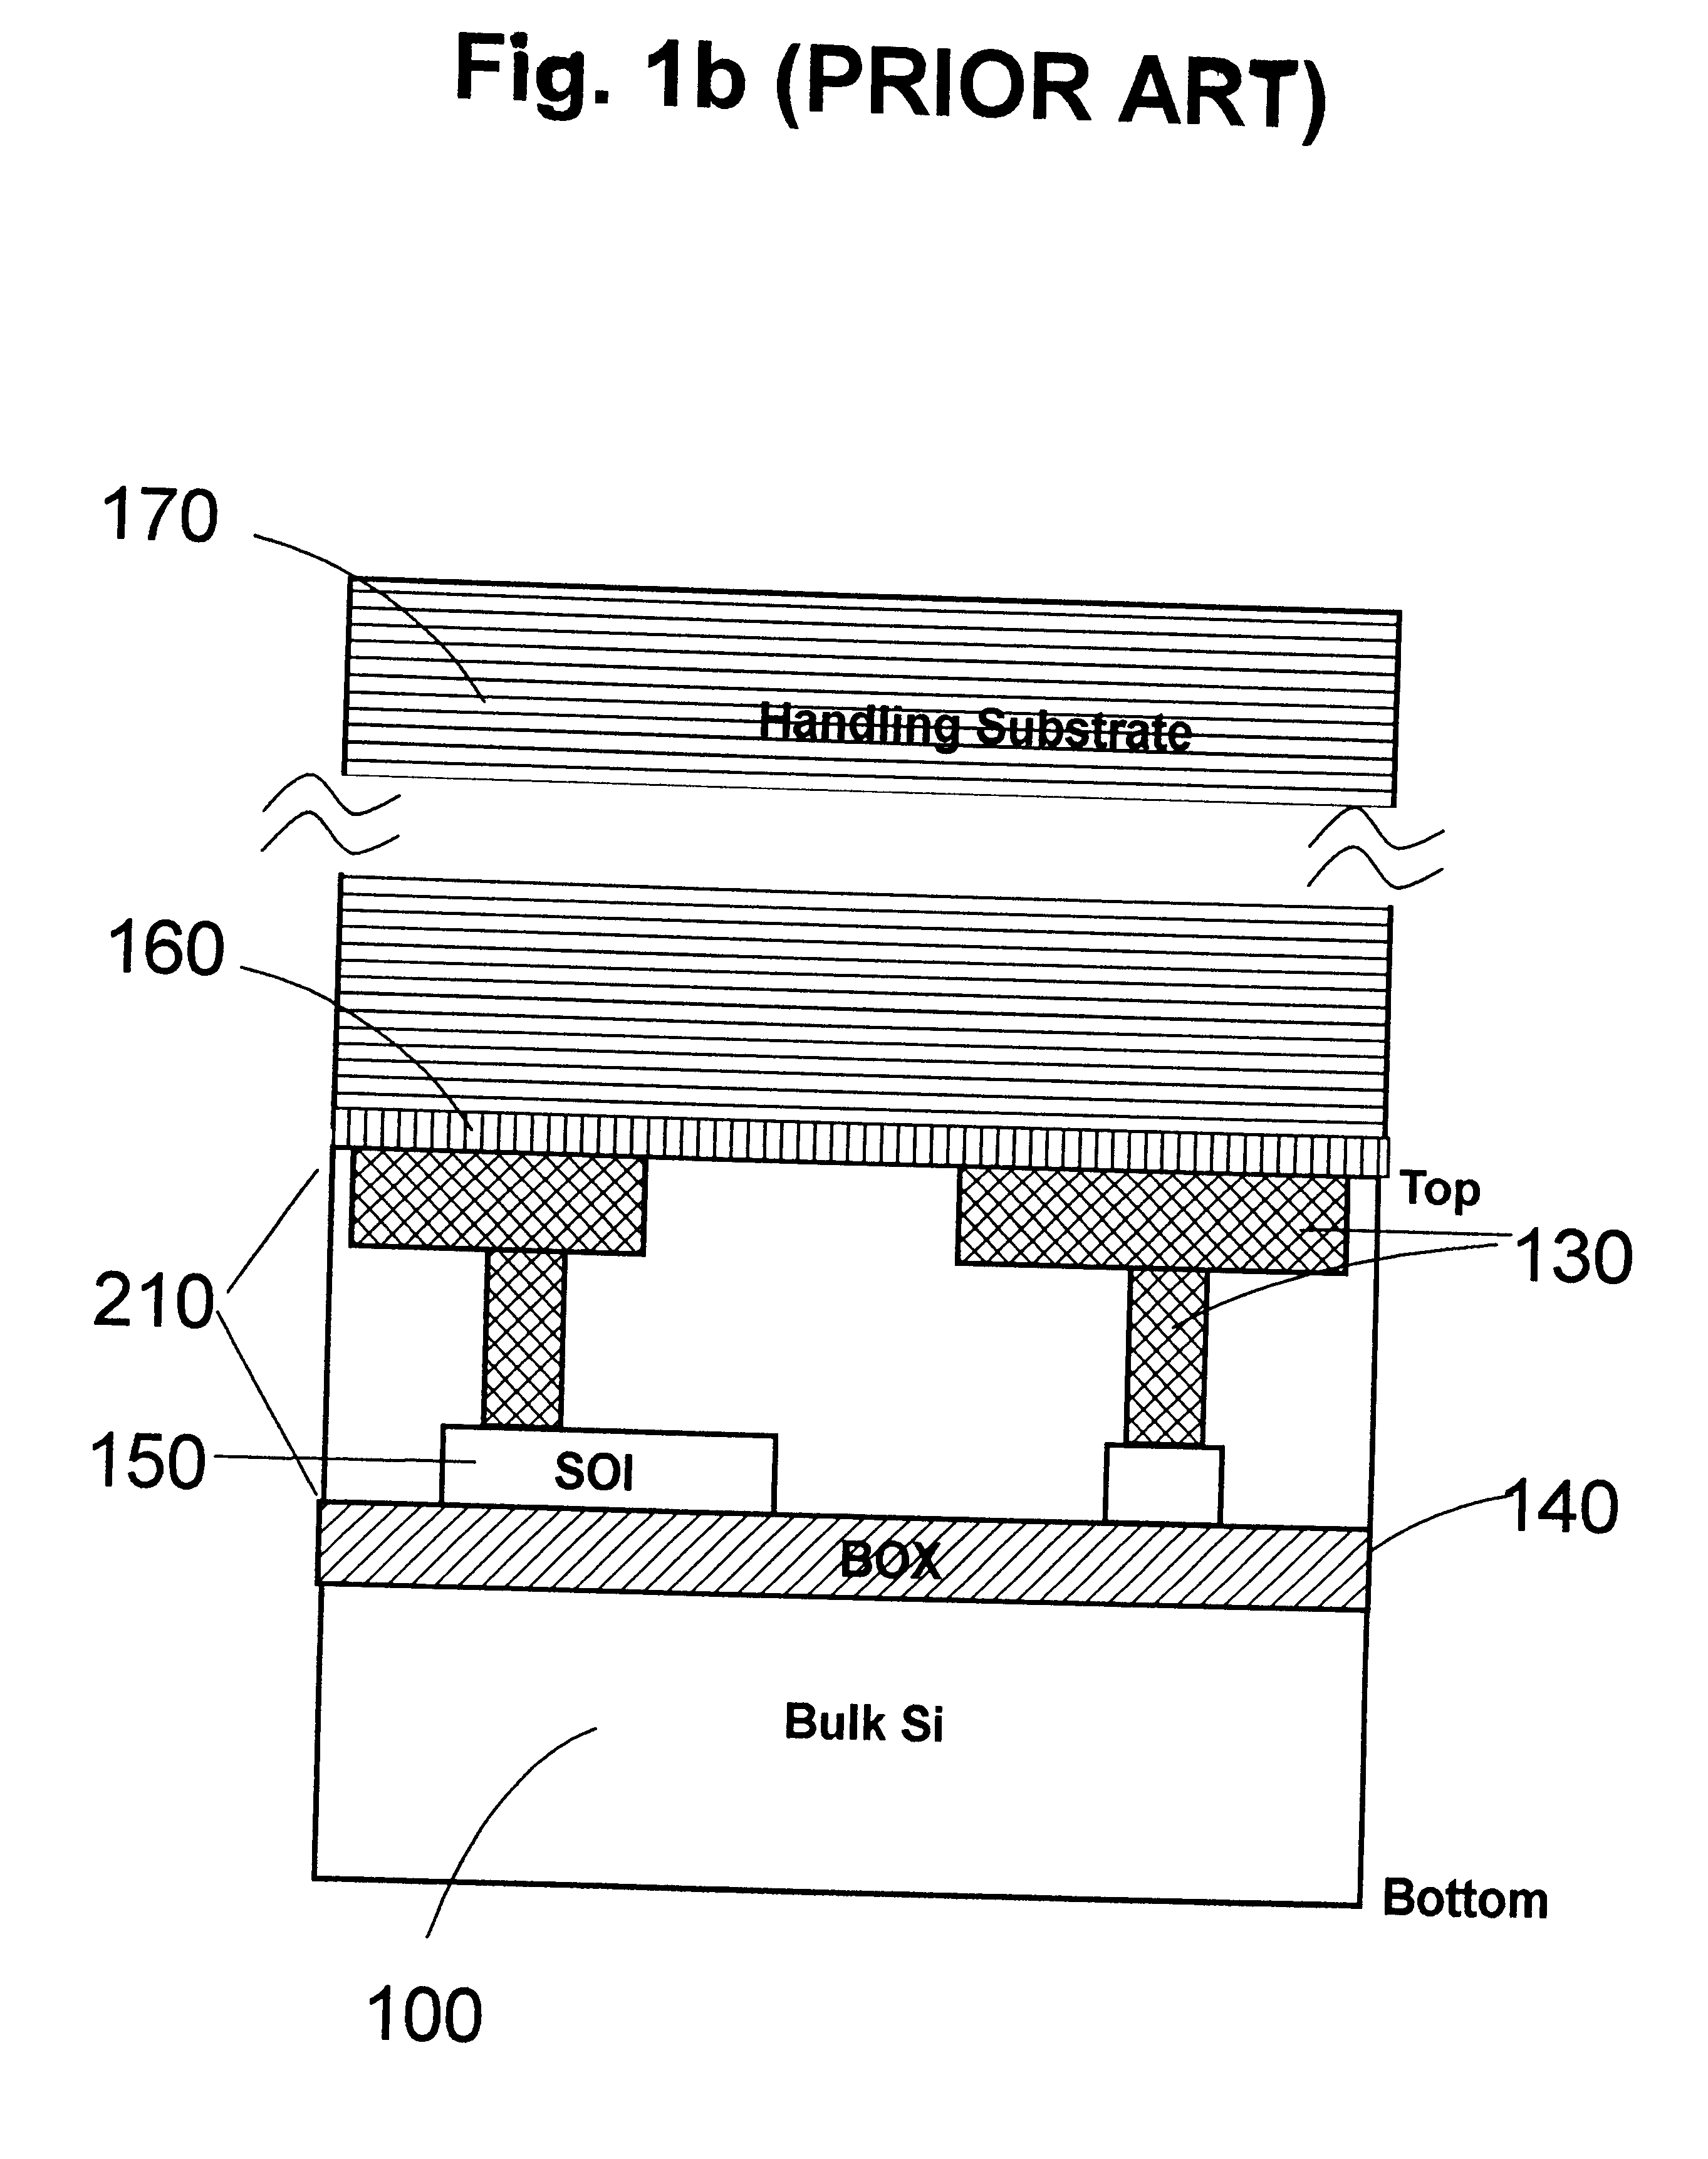 Three-dimensional chip stacking assembly